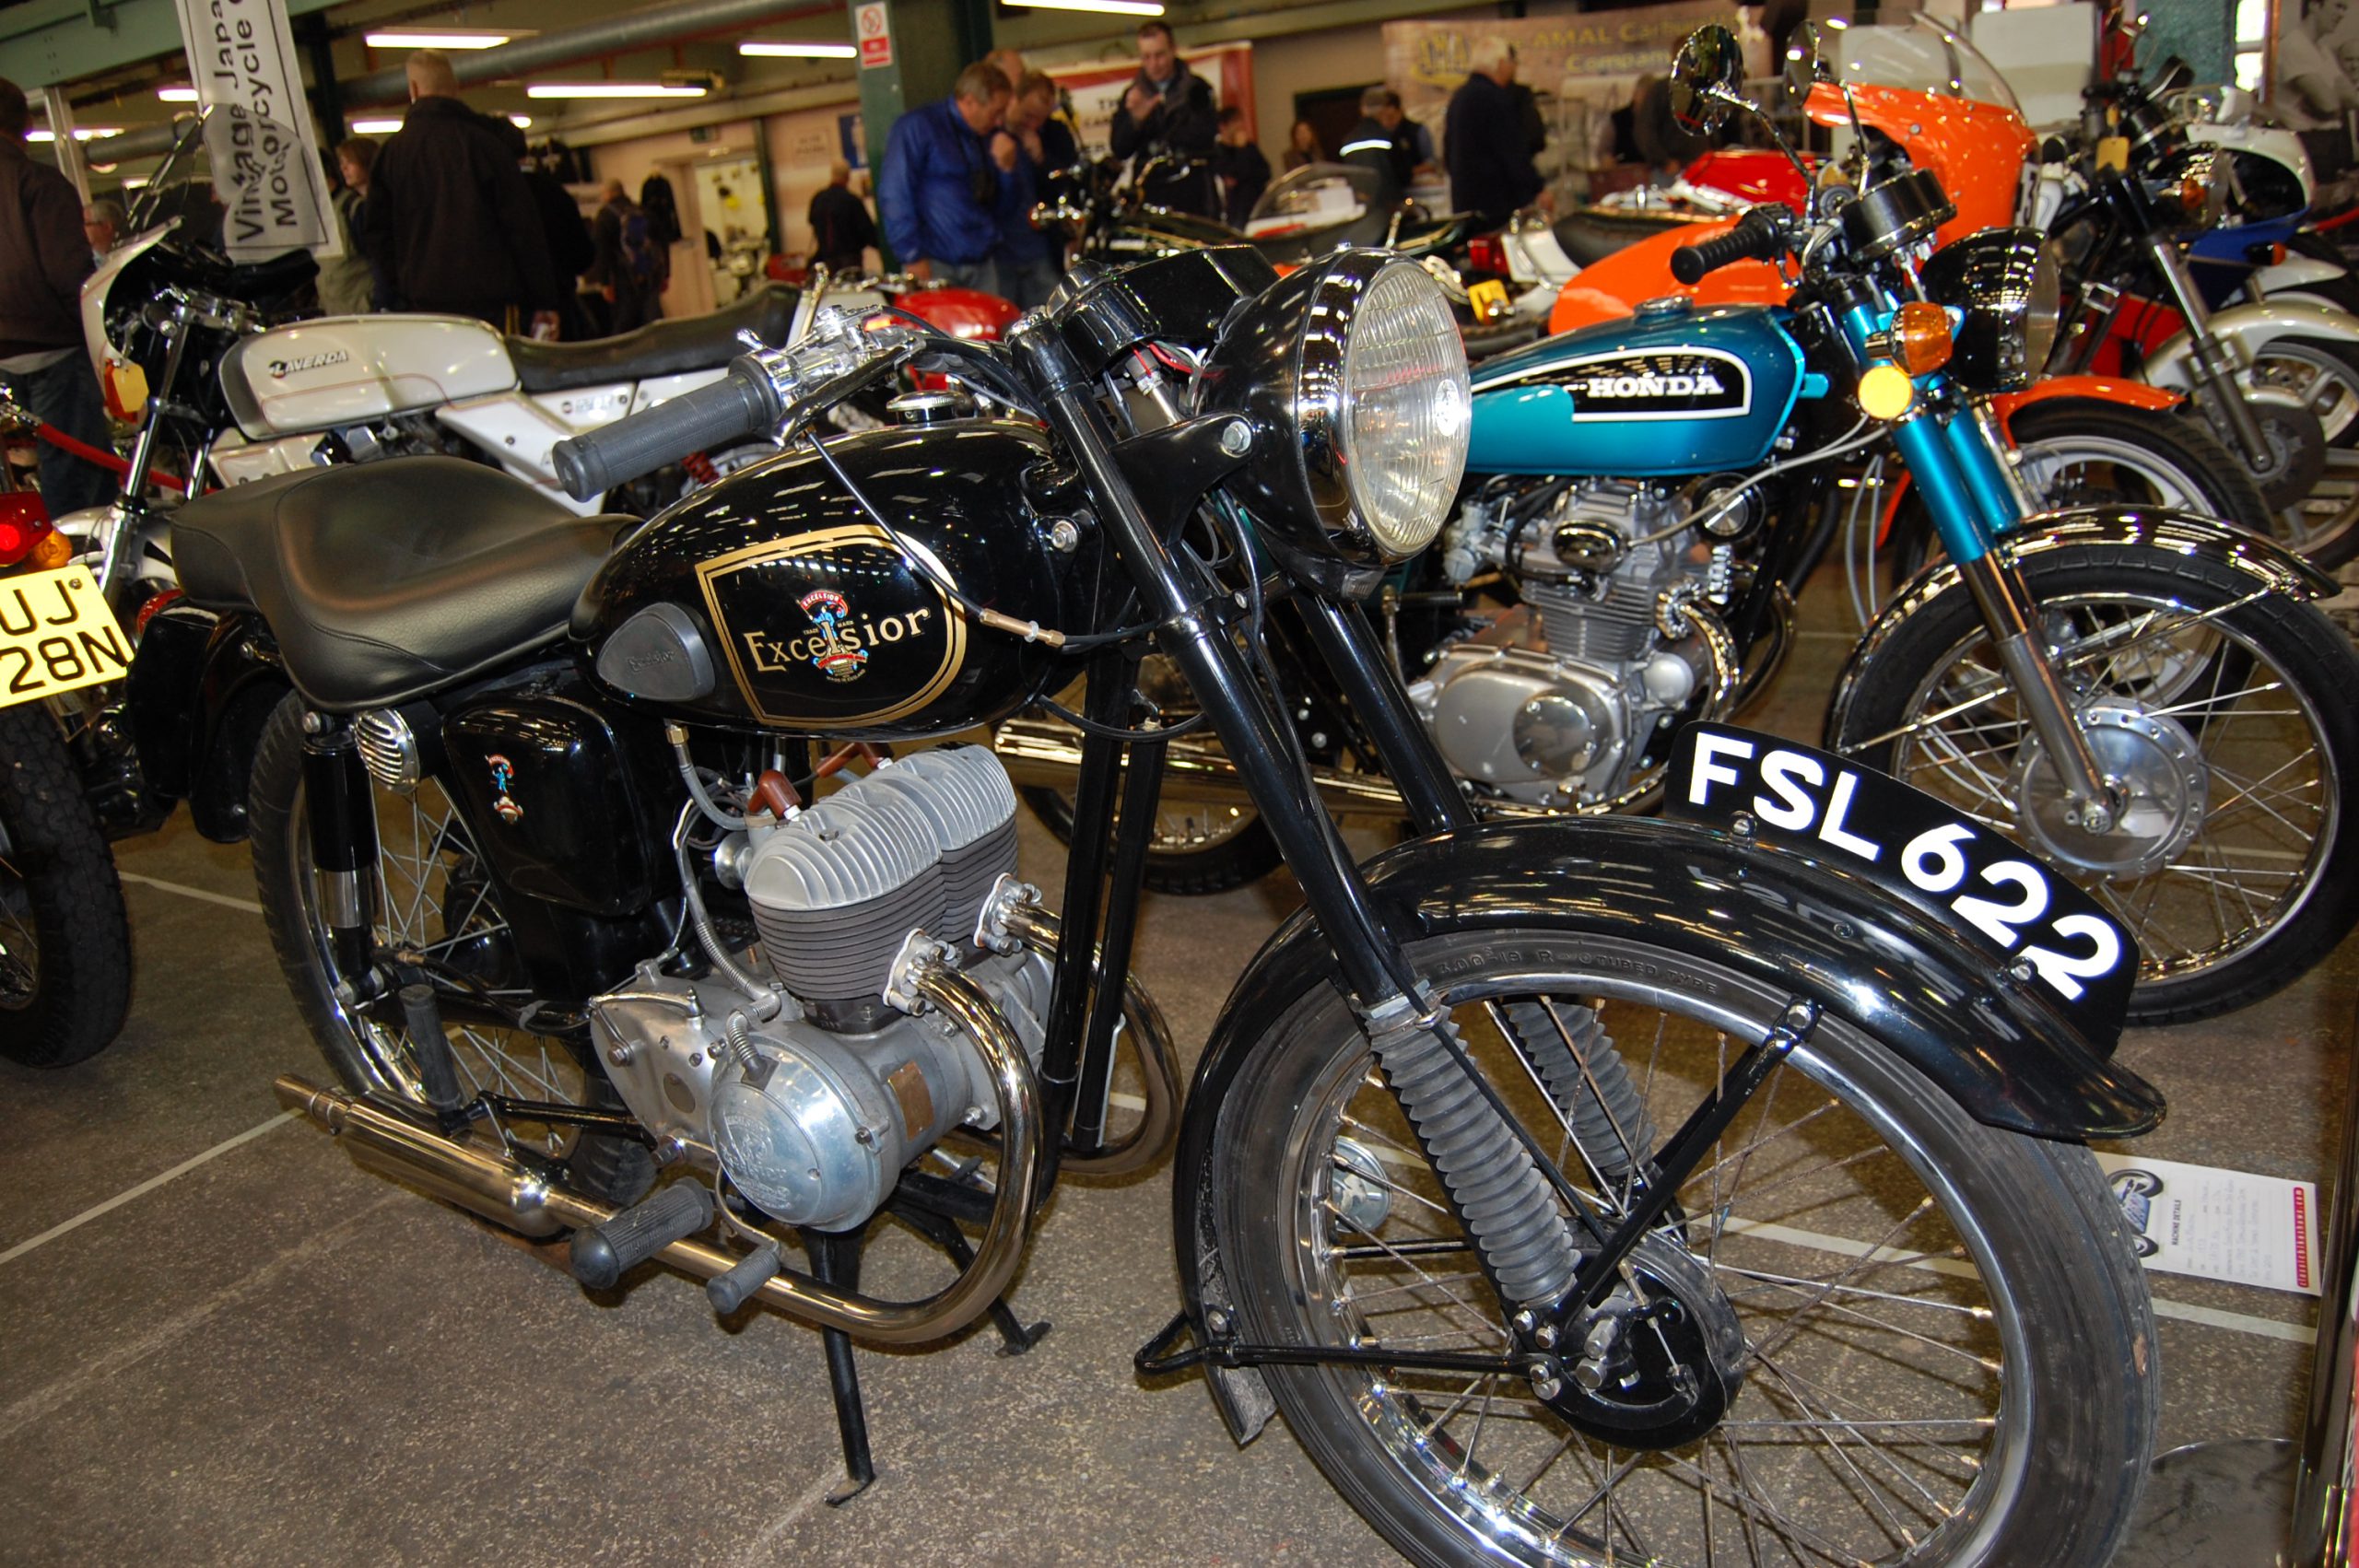 State 8 Motorcycles Unveiled in San Francisco